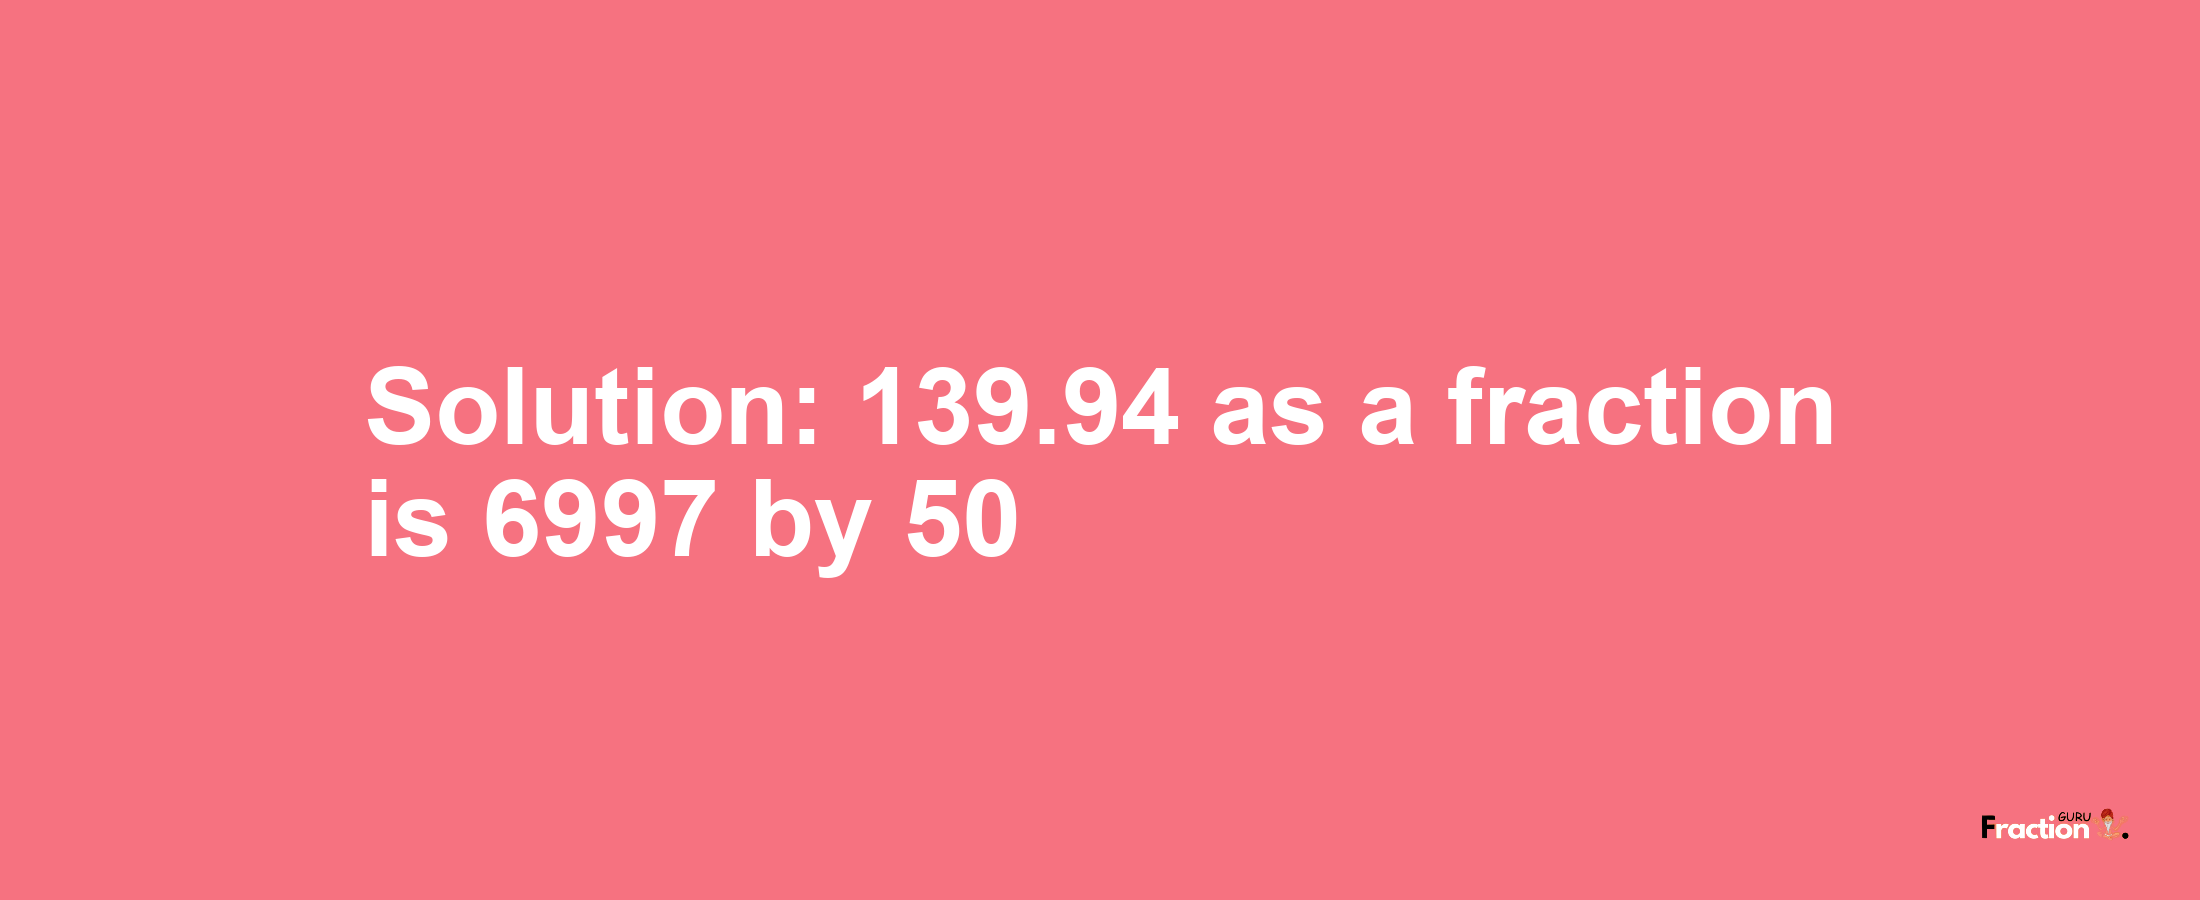 Solution:139.94 as a fraction is 6997/50